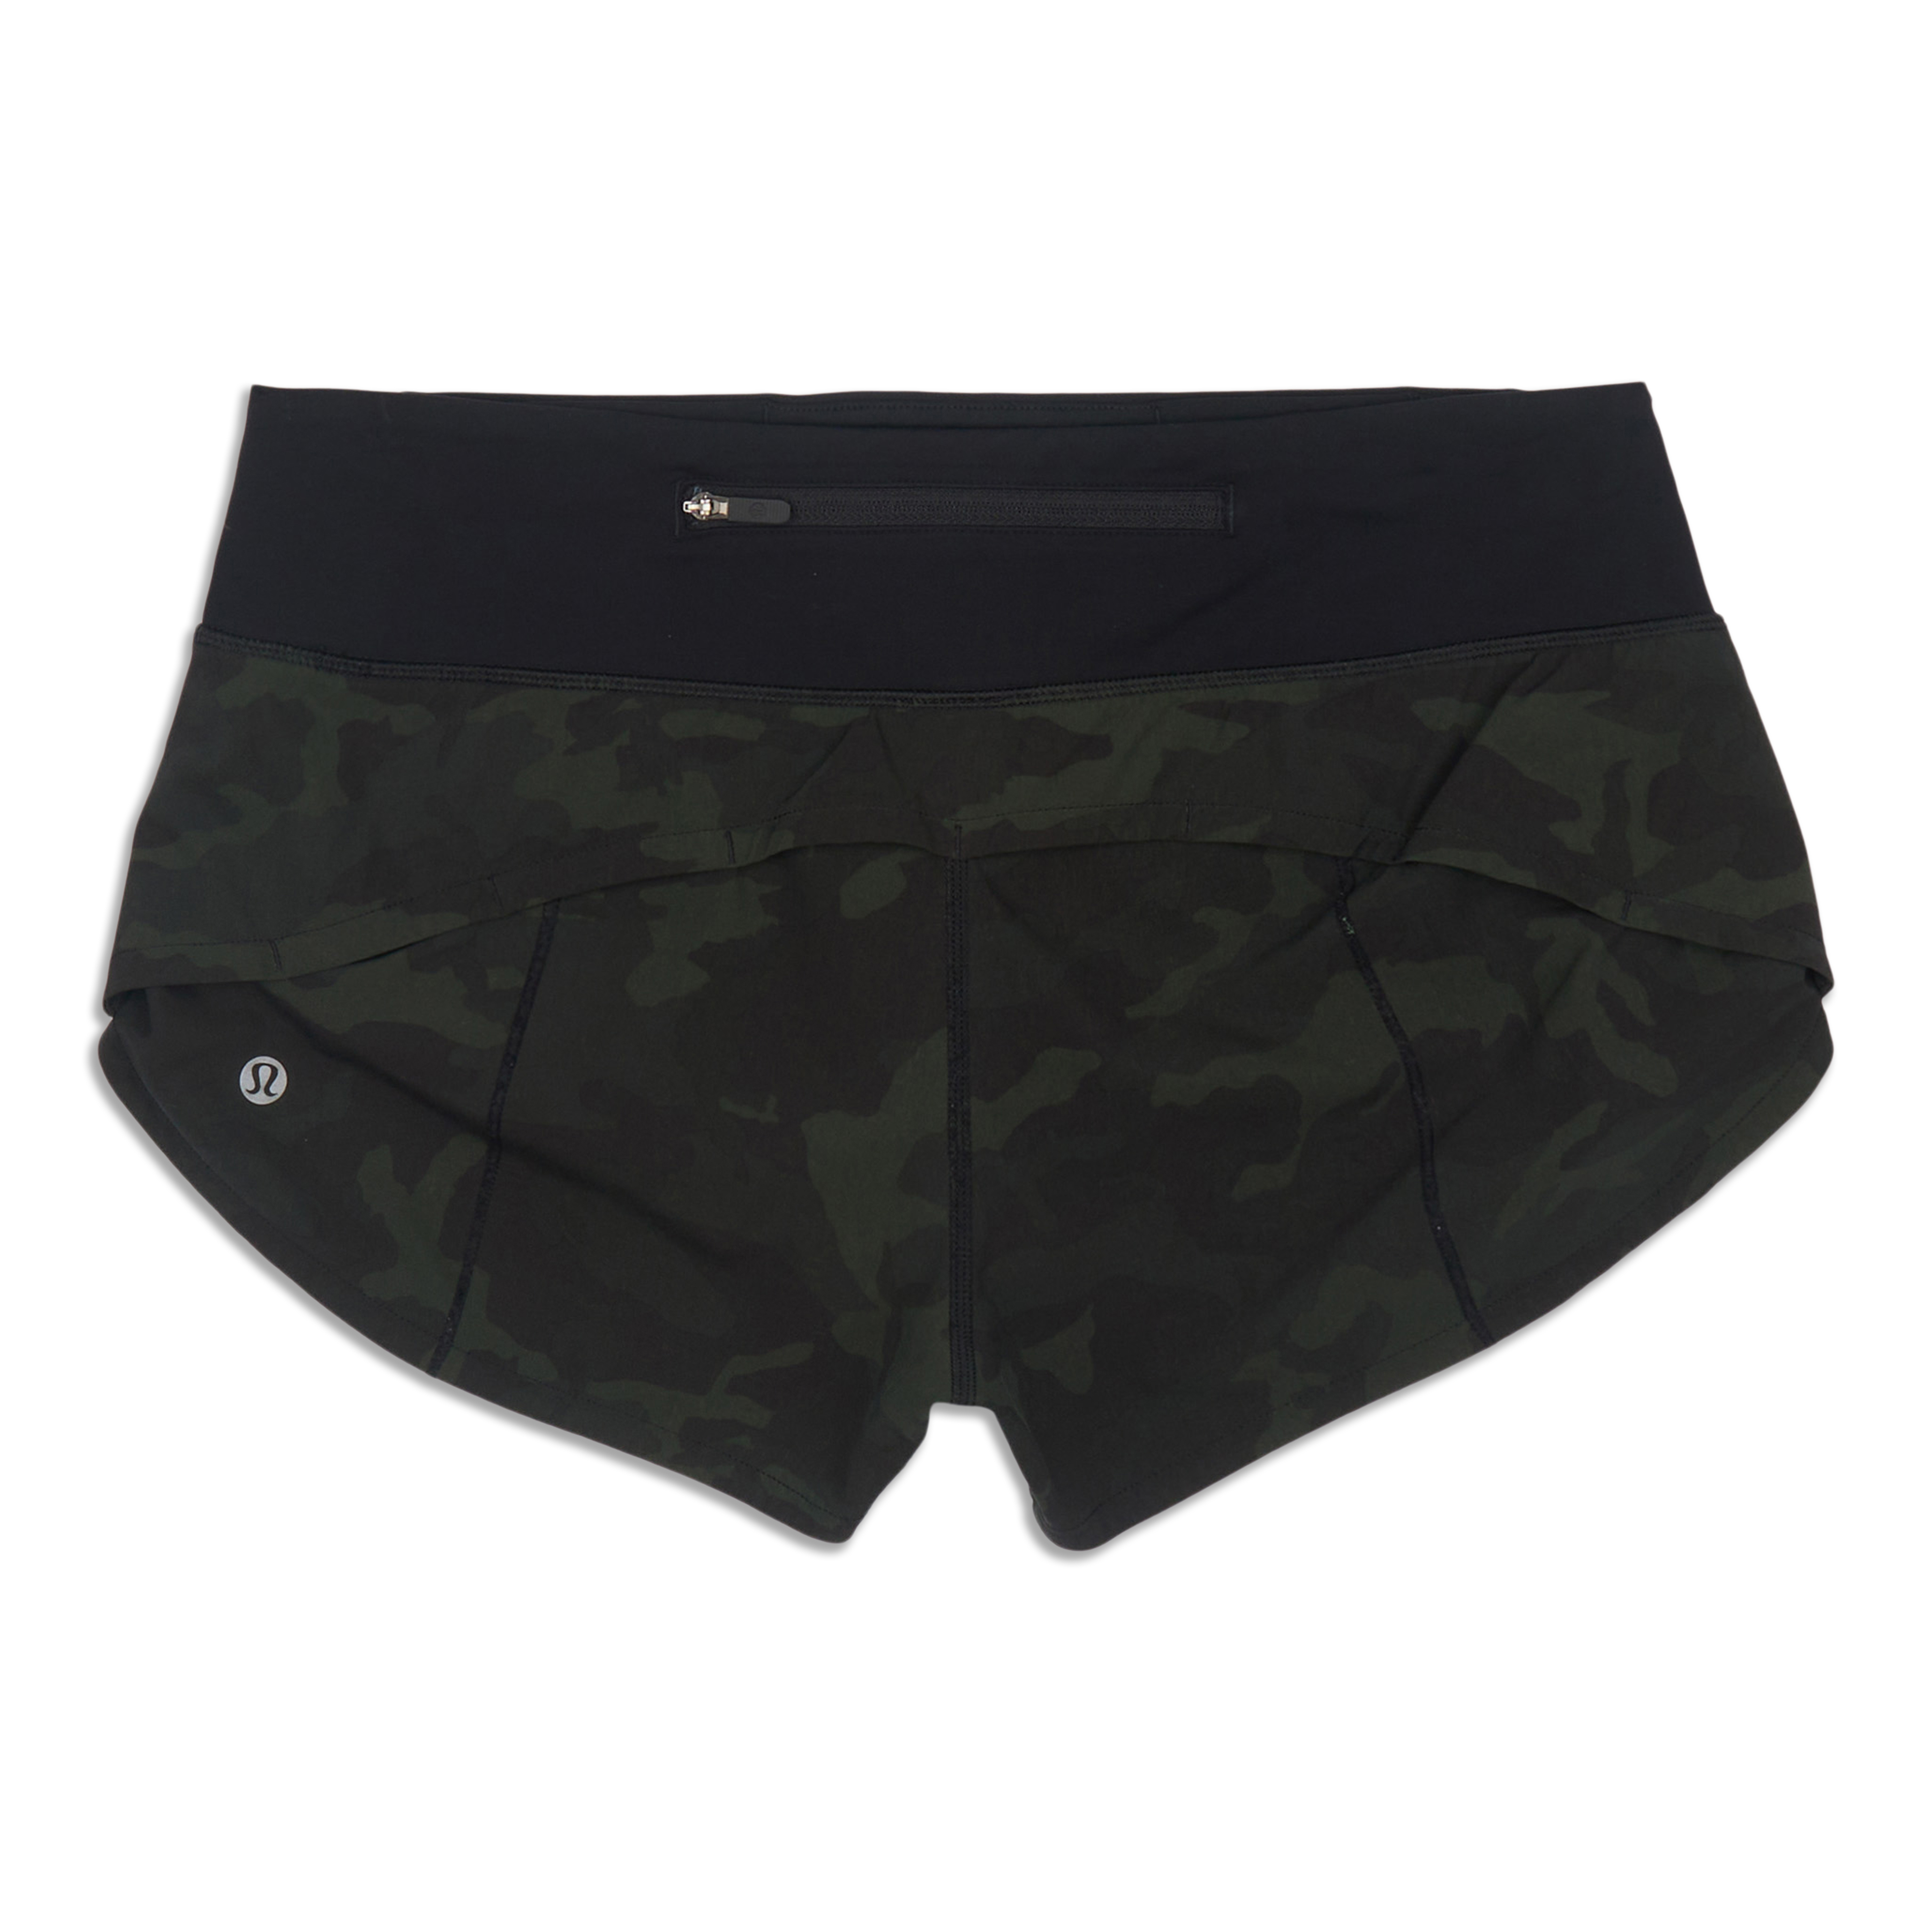 NEW LULULEMON Hotty Hot 4 Short HR 2 6 10 12 TALL Incognito Camo Grey Black